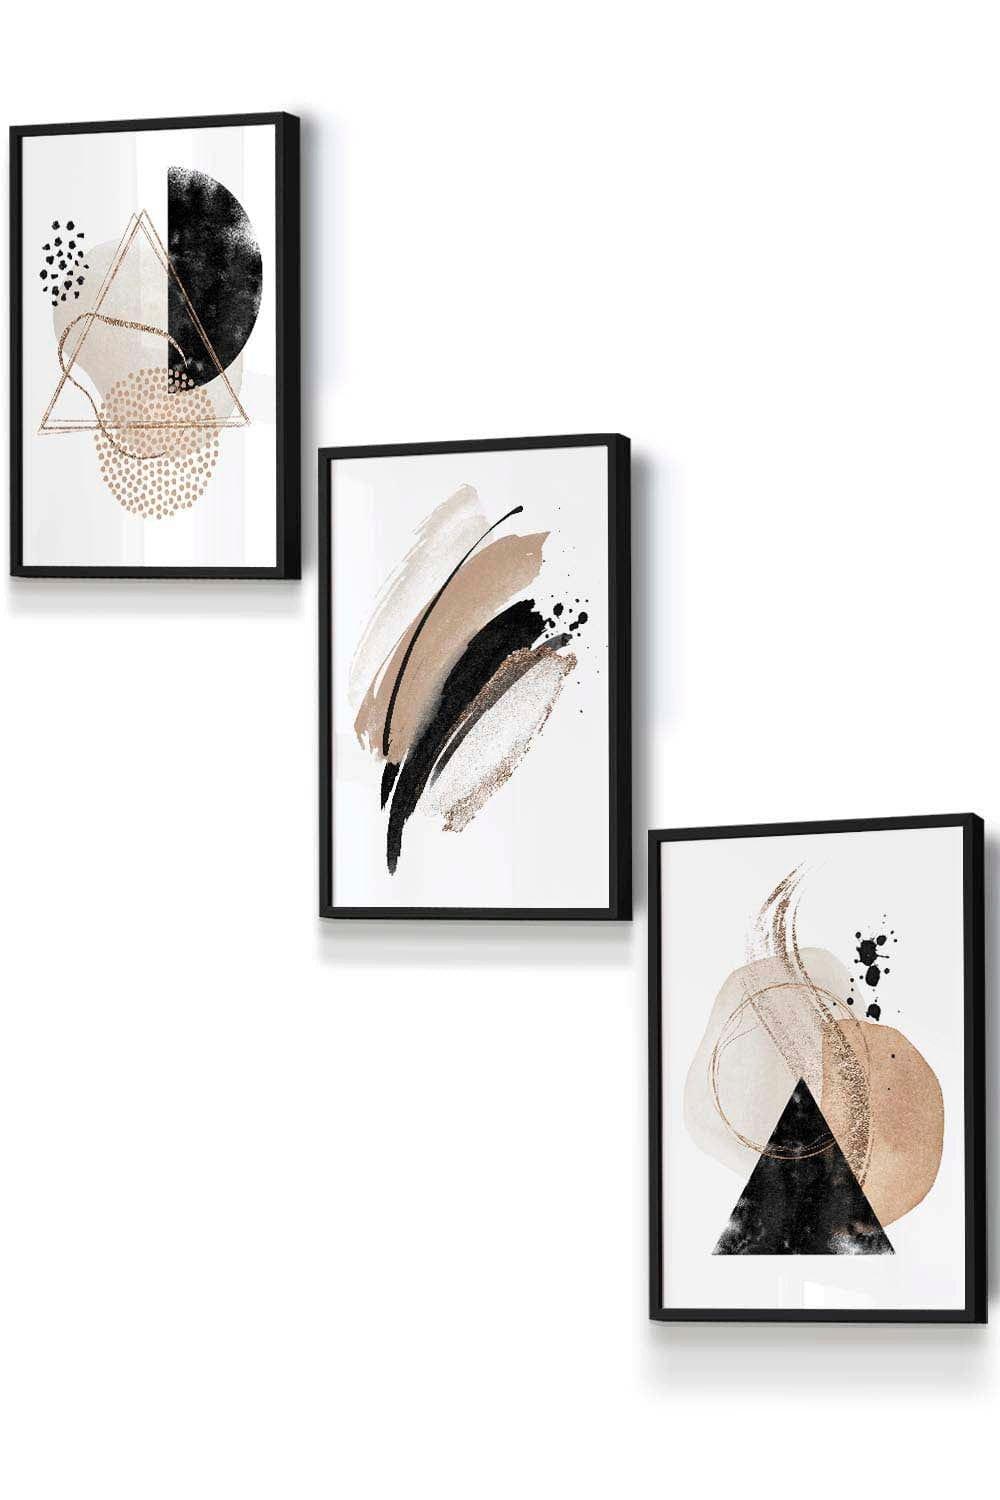 Abstract Black Beige Watercolour Shapes Framed Wall Art - Small